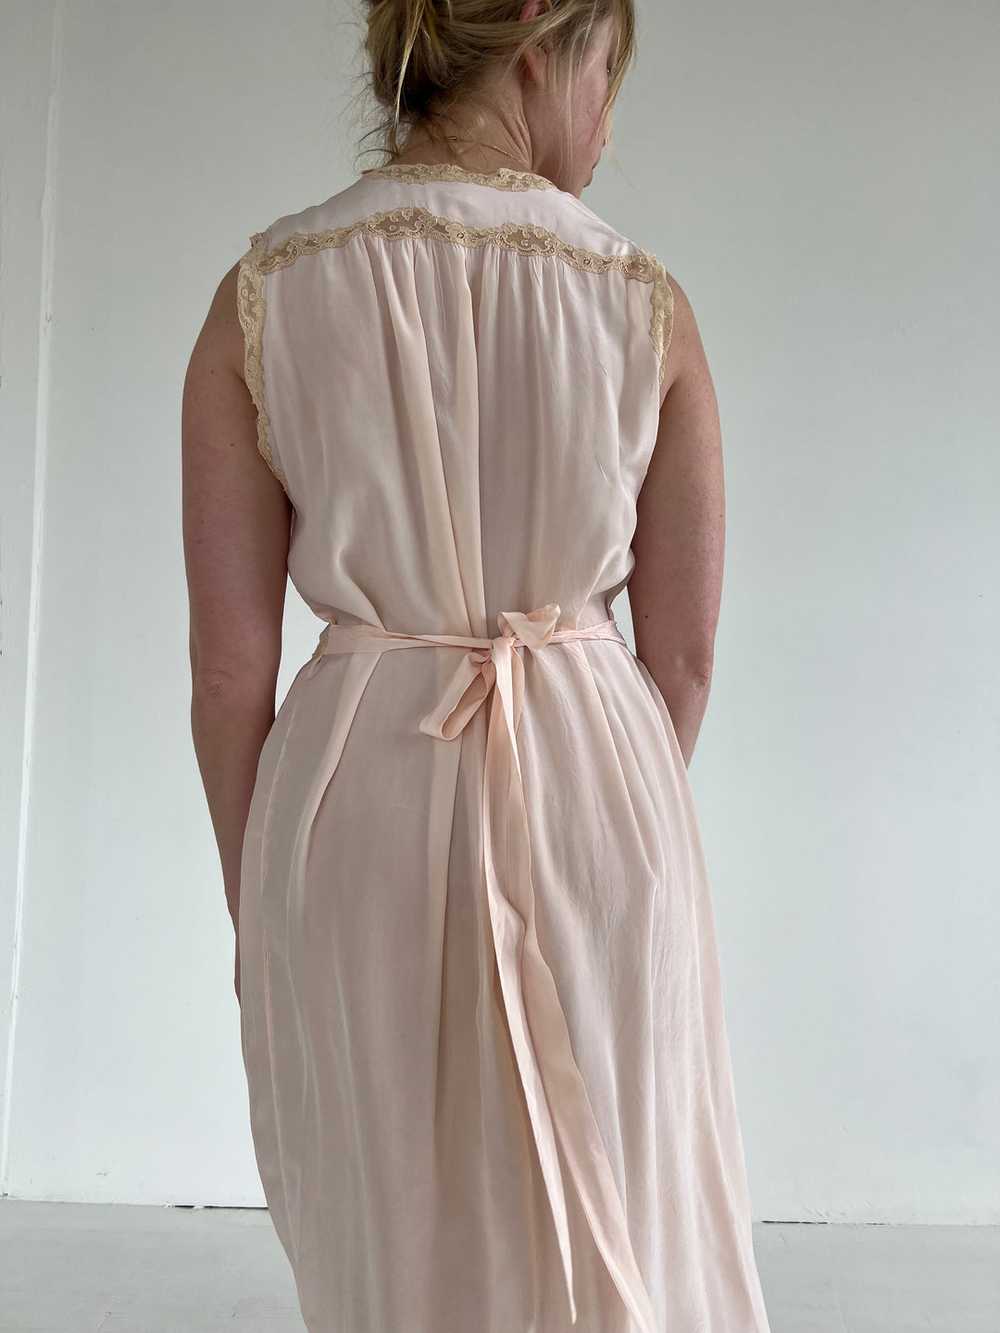 1930's Pale Pink Silk Slip Dress with Cream Lace - image 4